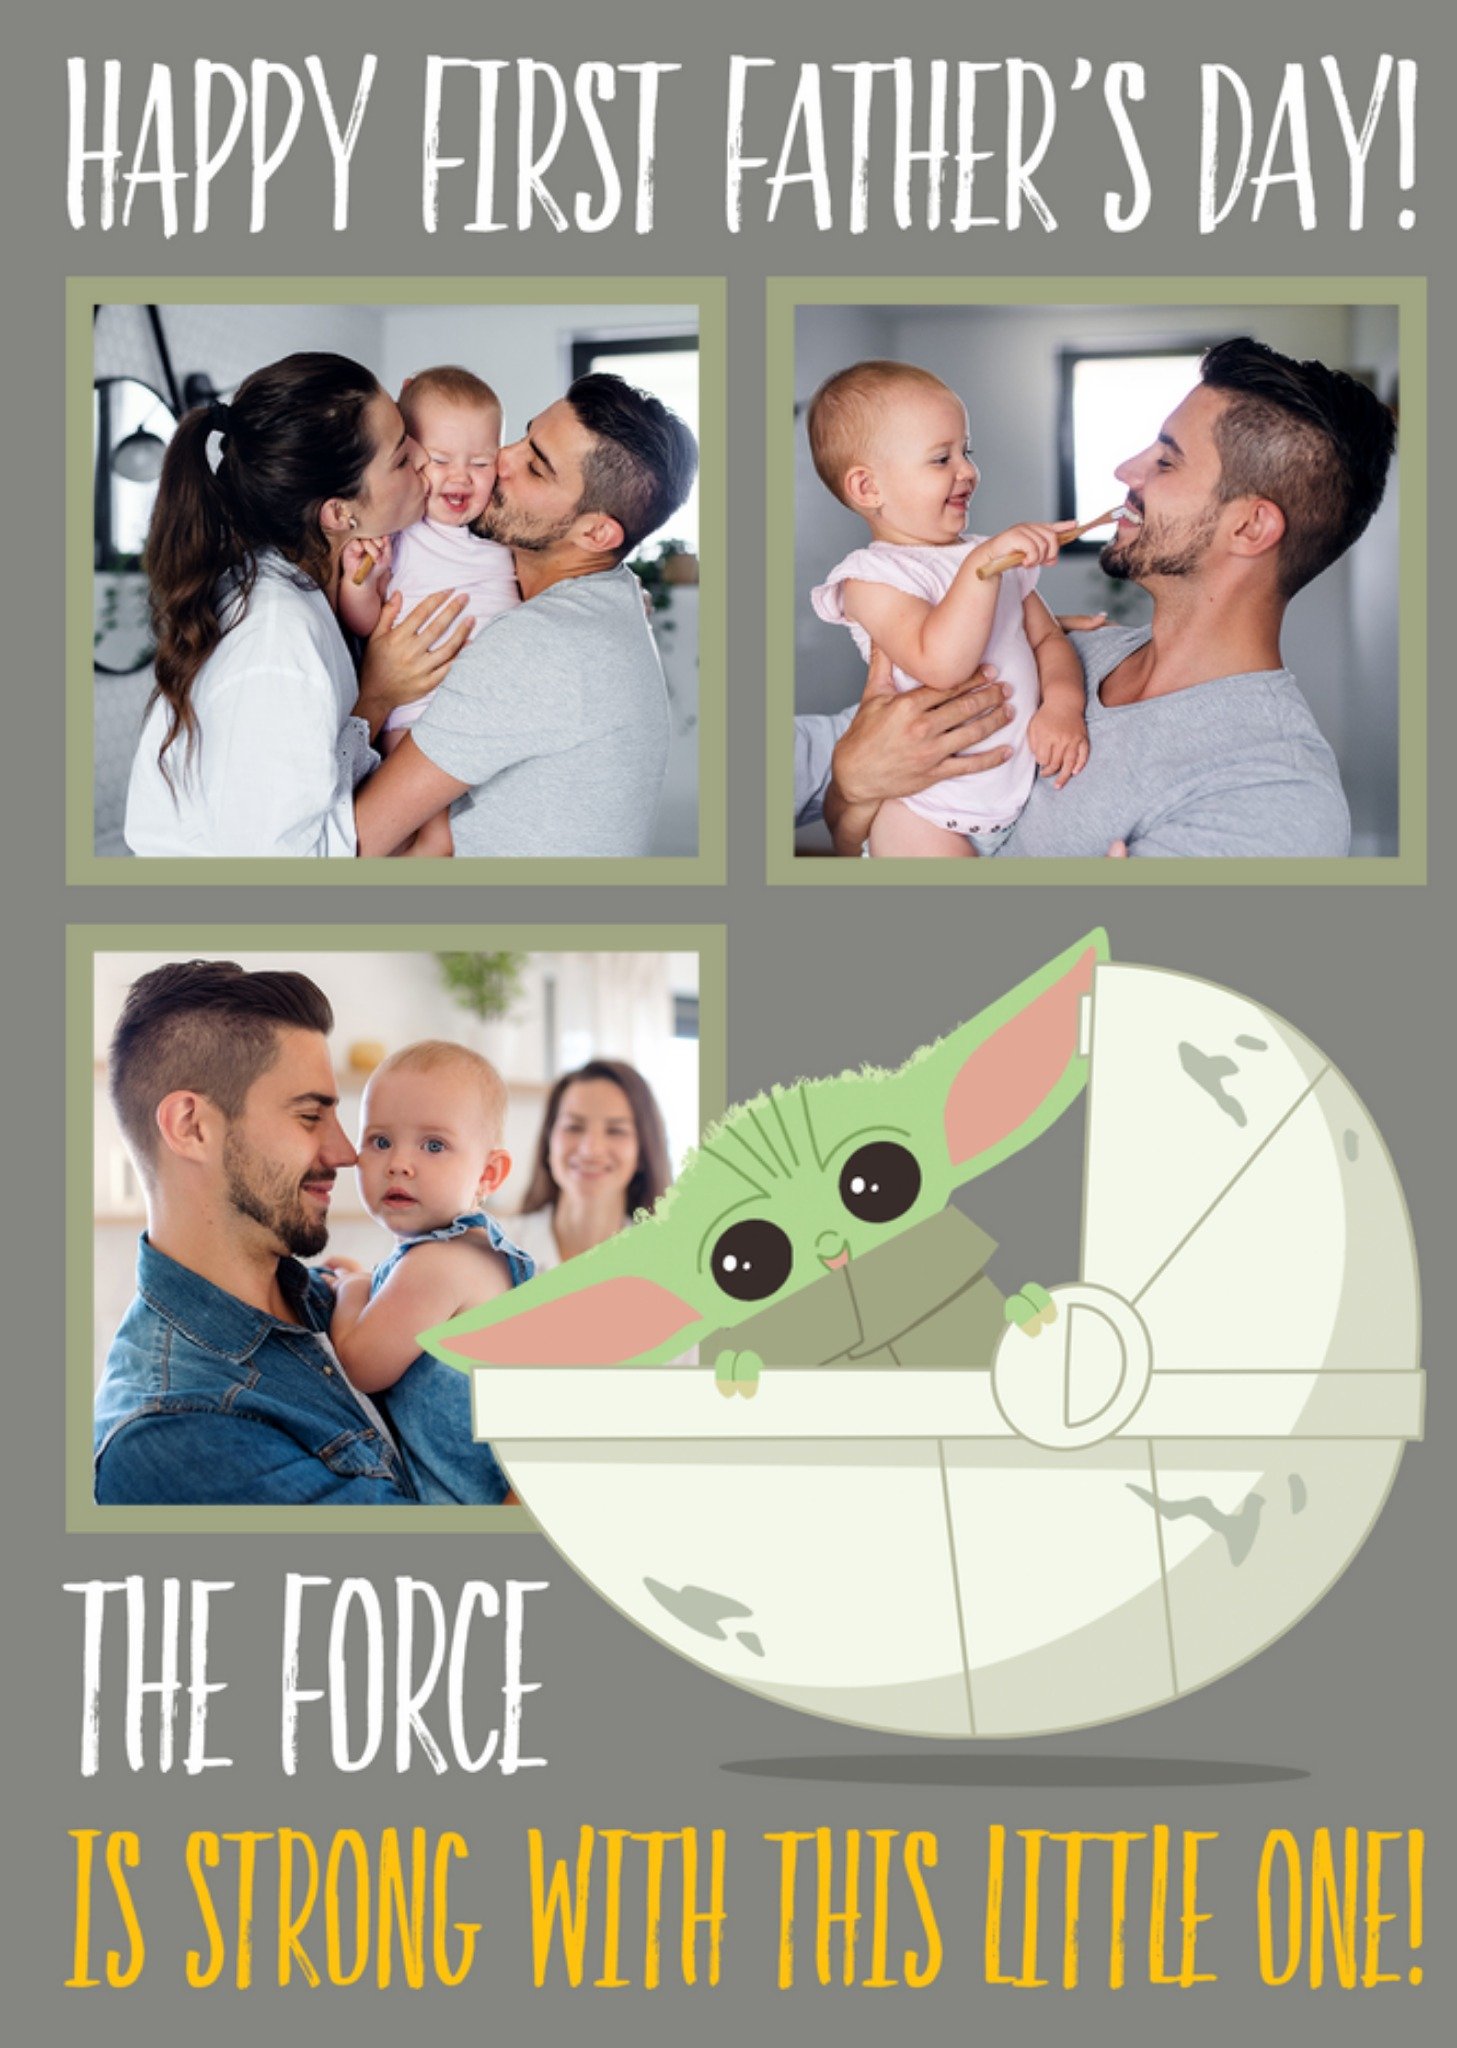 Disney Star Wars The Mandalorian Happy Fathers Day The Force Is Strong Photo Upload Card Ecard